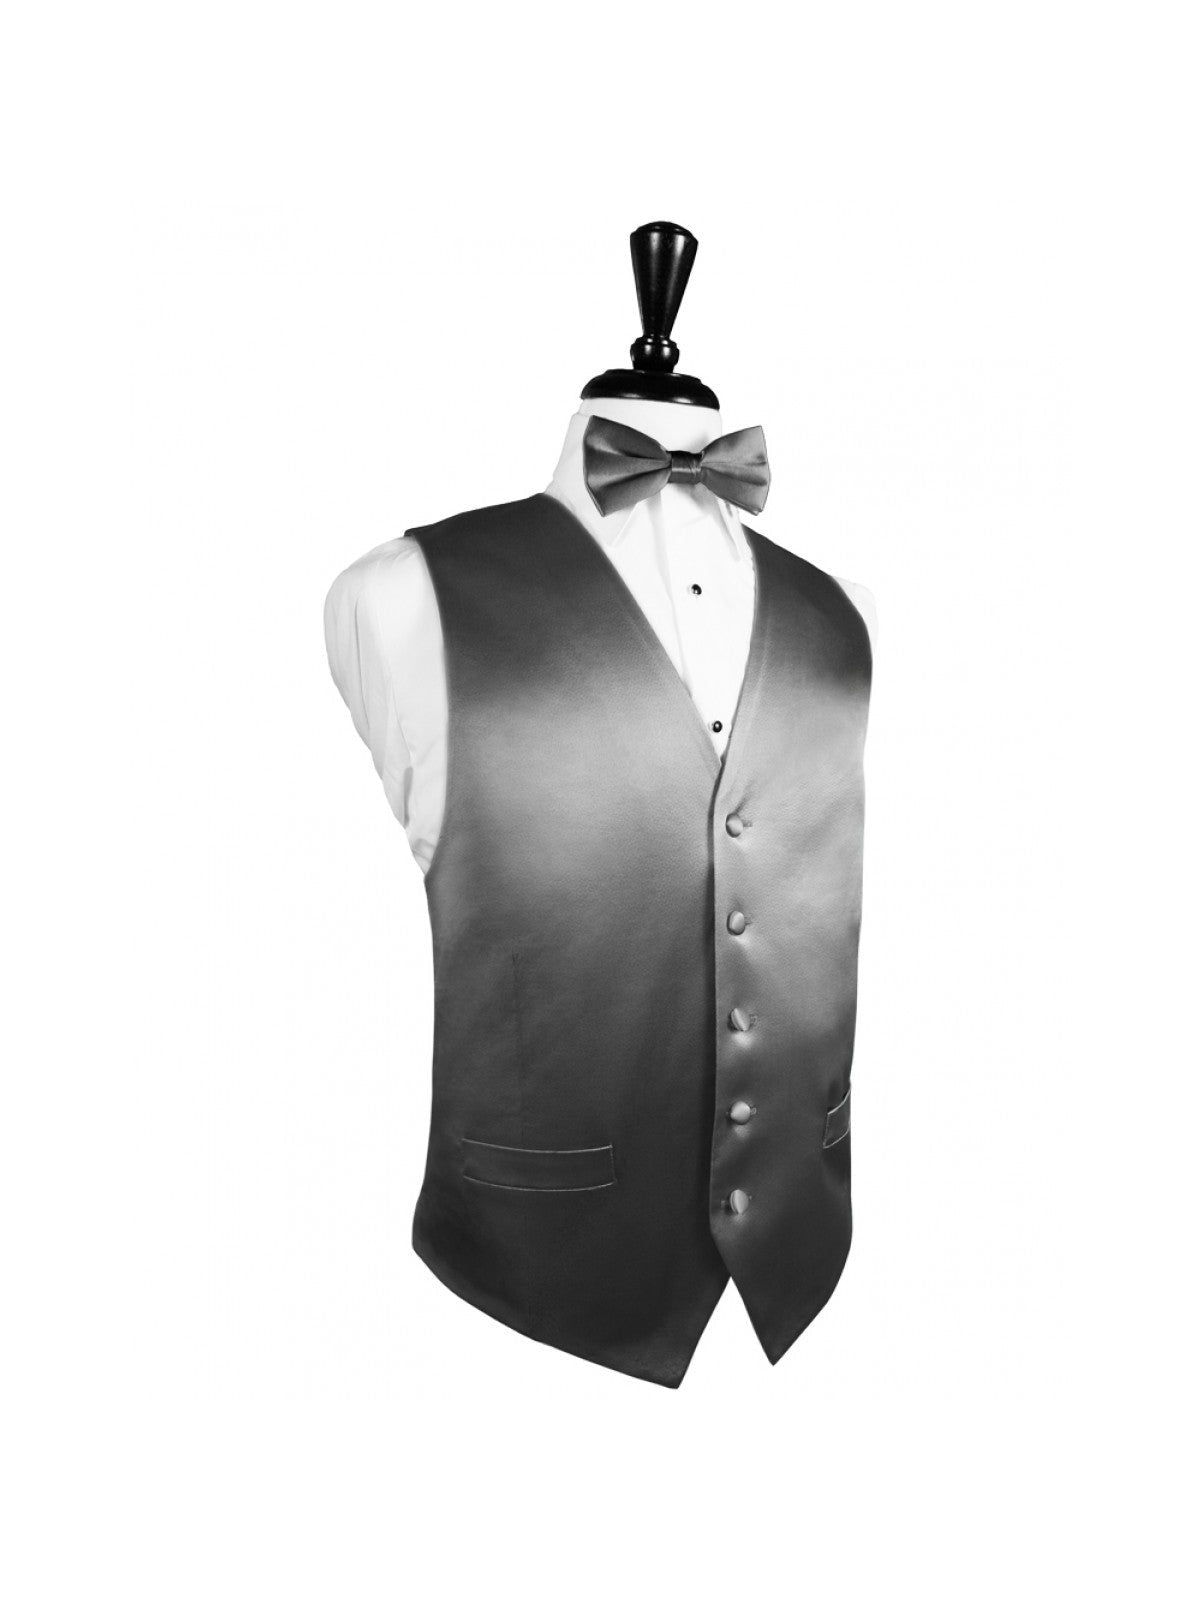 Silver Noble Silk Full Back Tuxedo Vest and Tie Set by Cardi